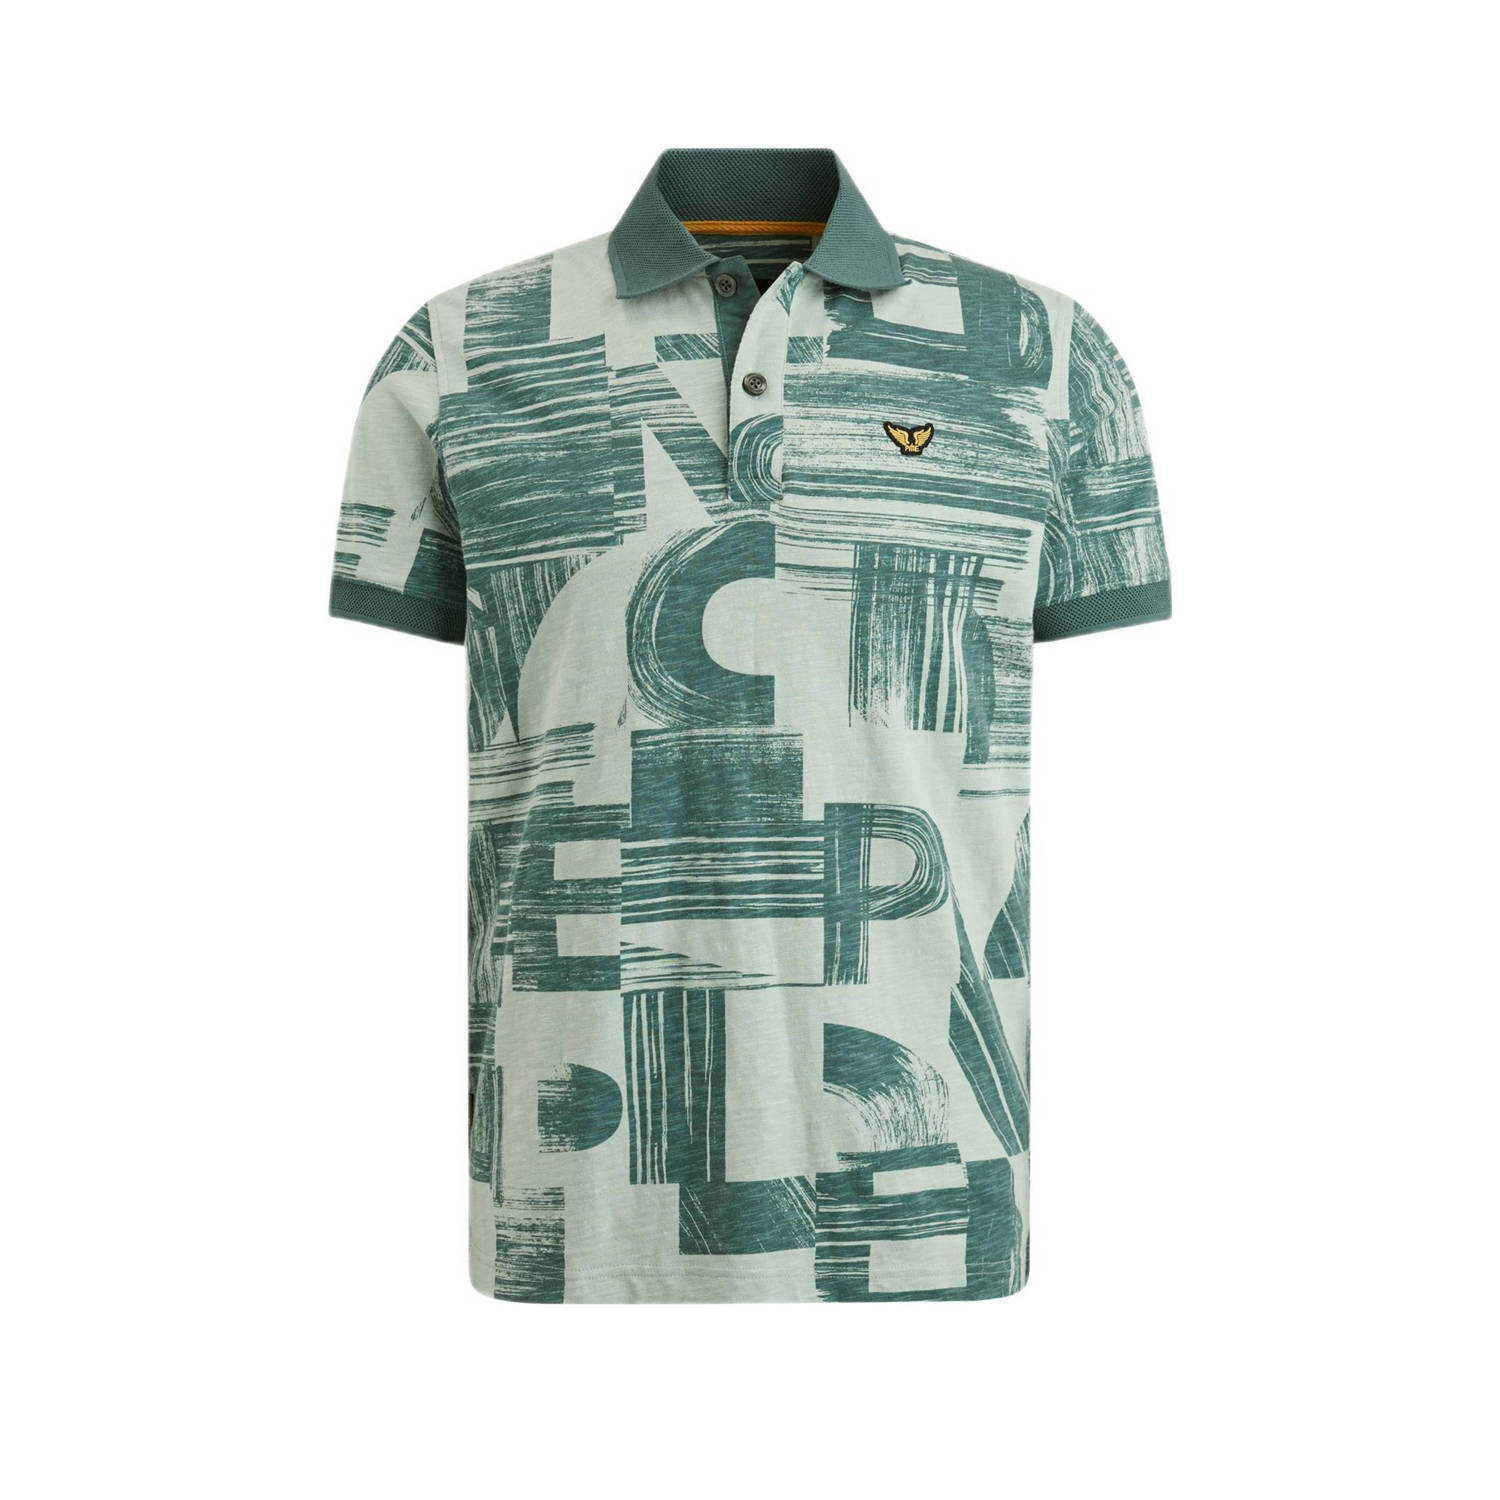 PME Legend polo met all over print groen